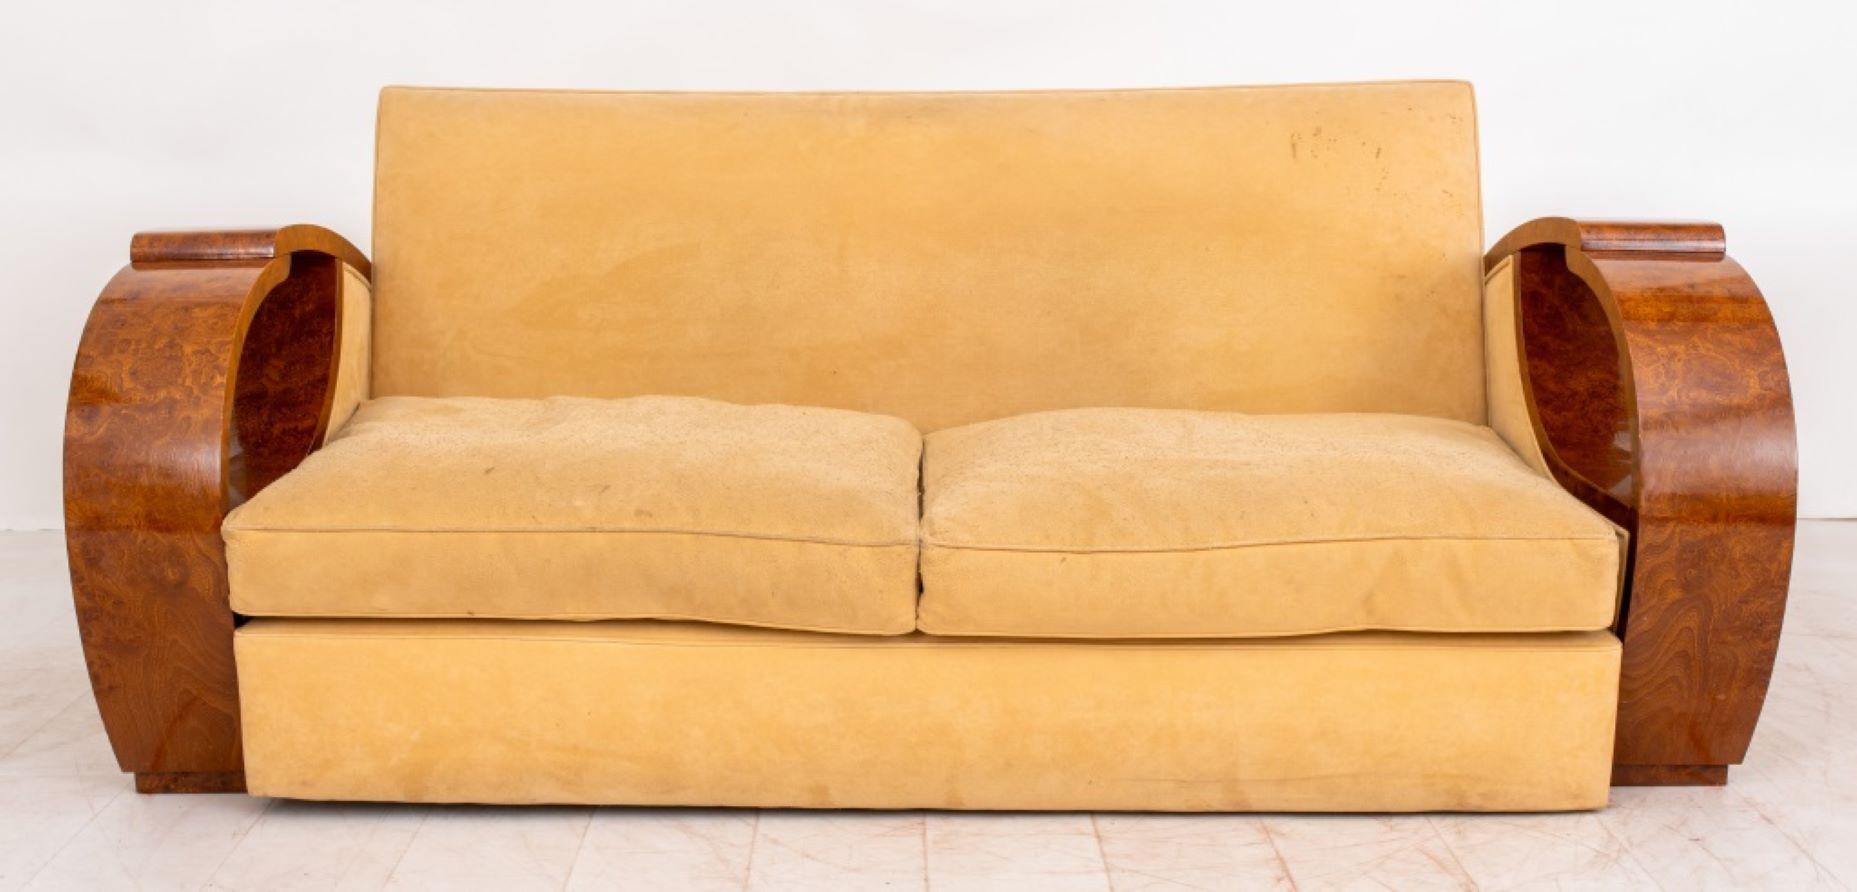 Art Deco style ash burl wood cloud armed sofa with upholstered back and seat with two drop in cushions. 30